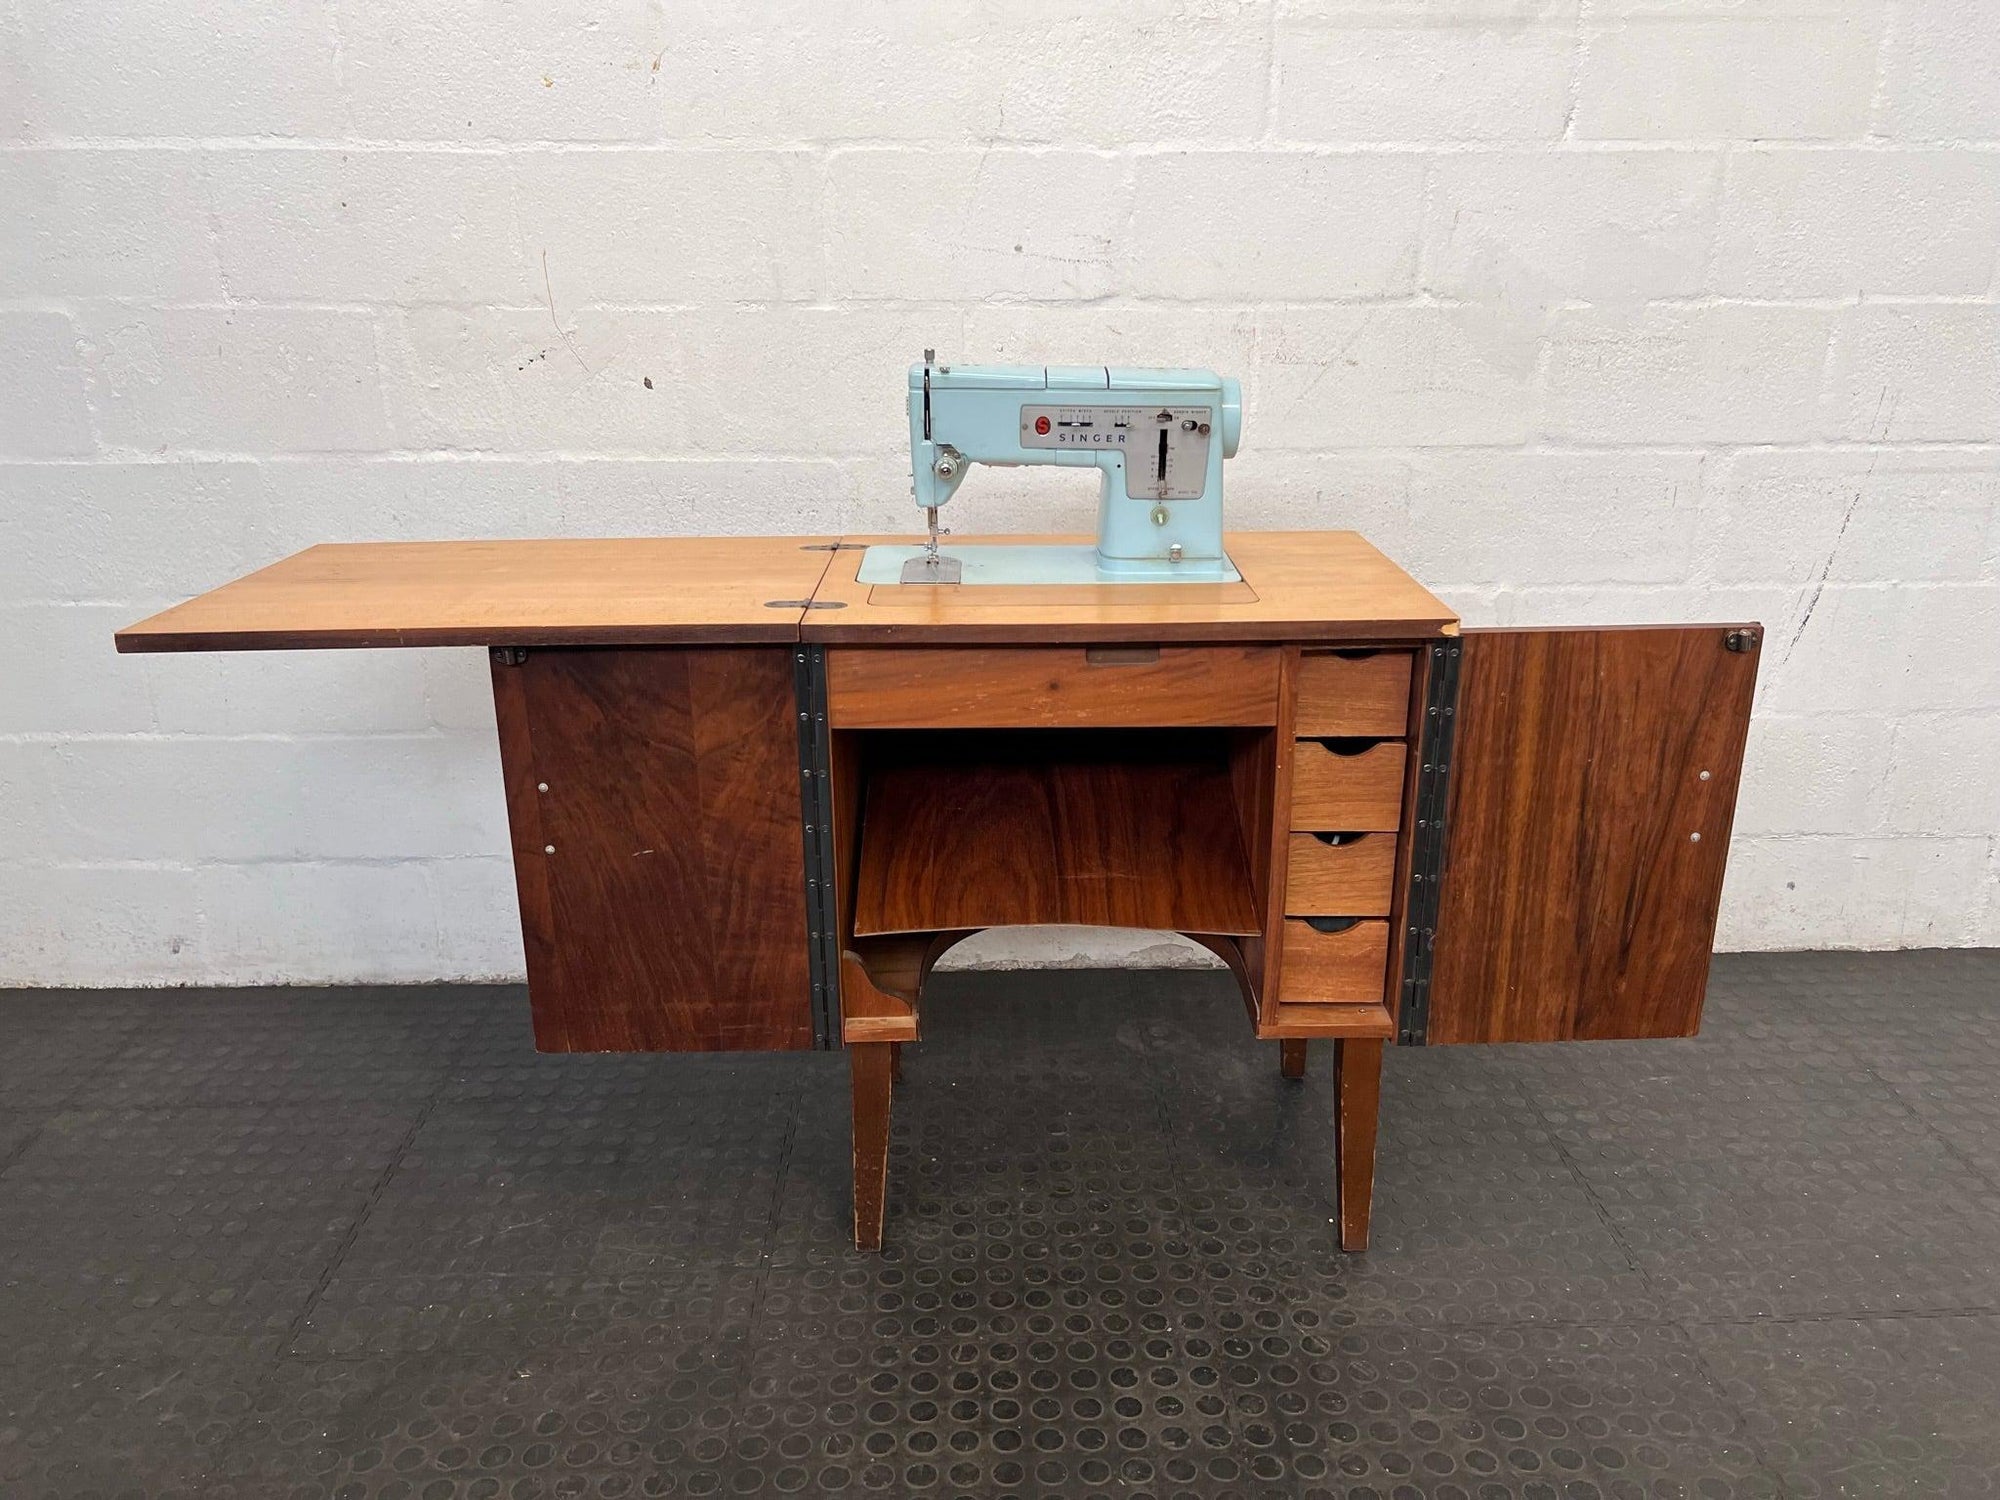 Singer Collapsible Sewing Machine Table (No power supply)